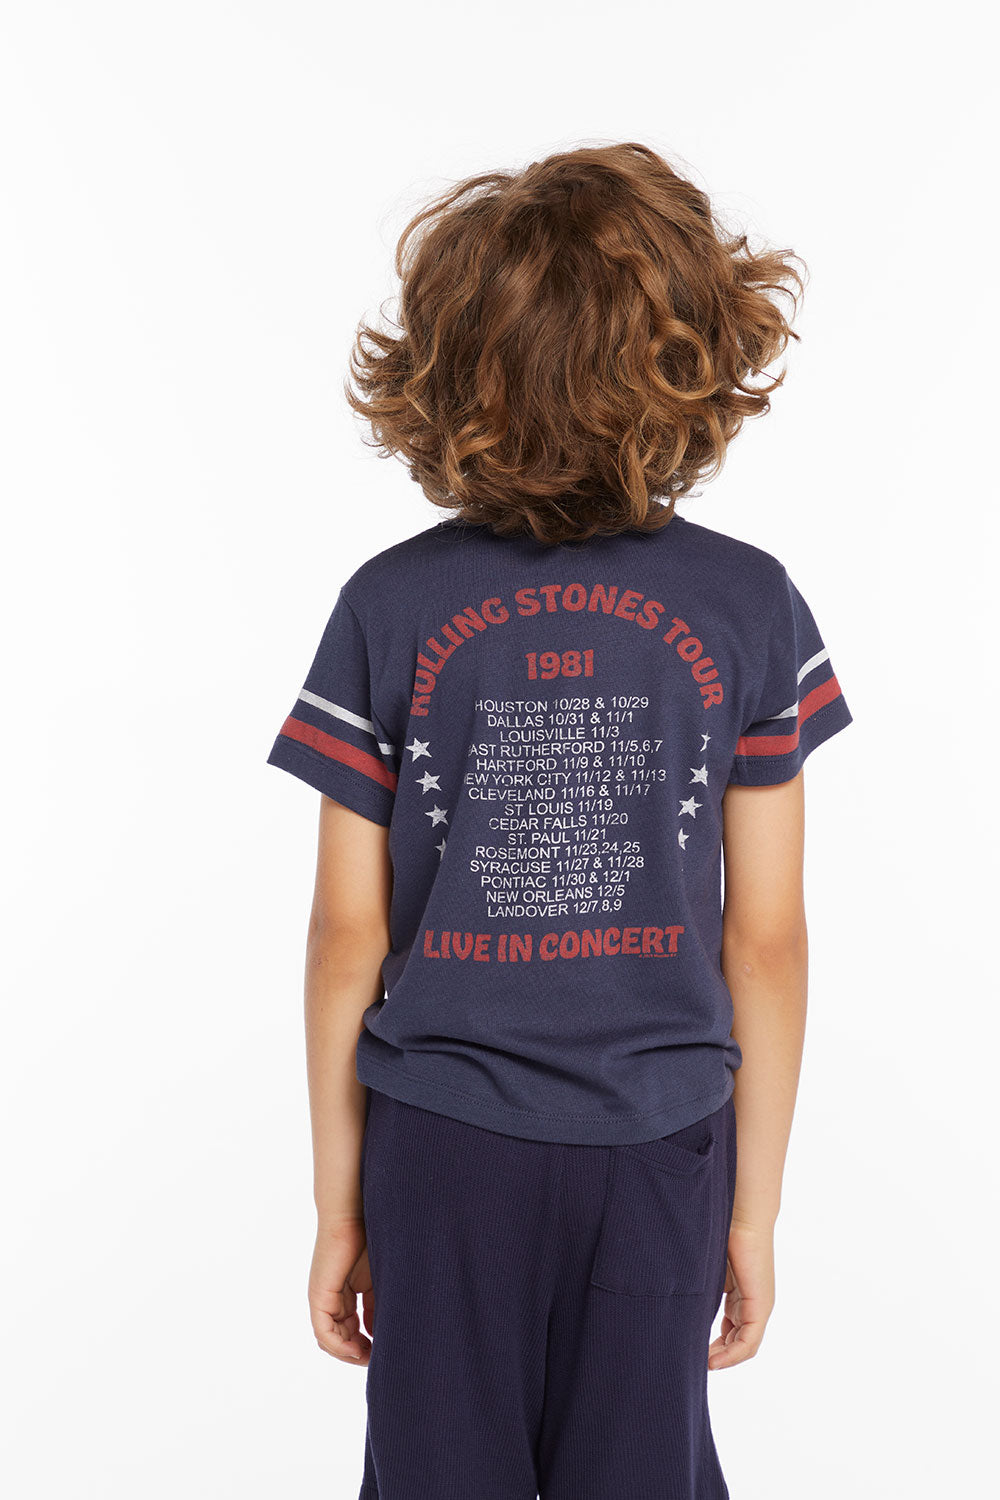 Rolling Stones Live In Concert Boys Tee BOYS chaserbrand